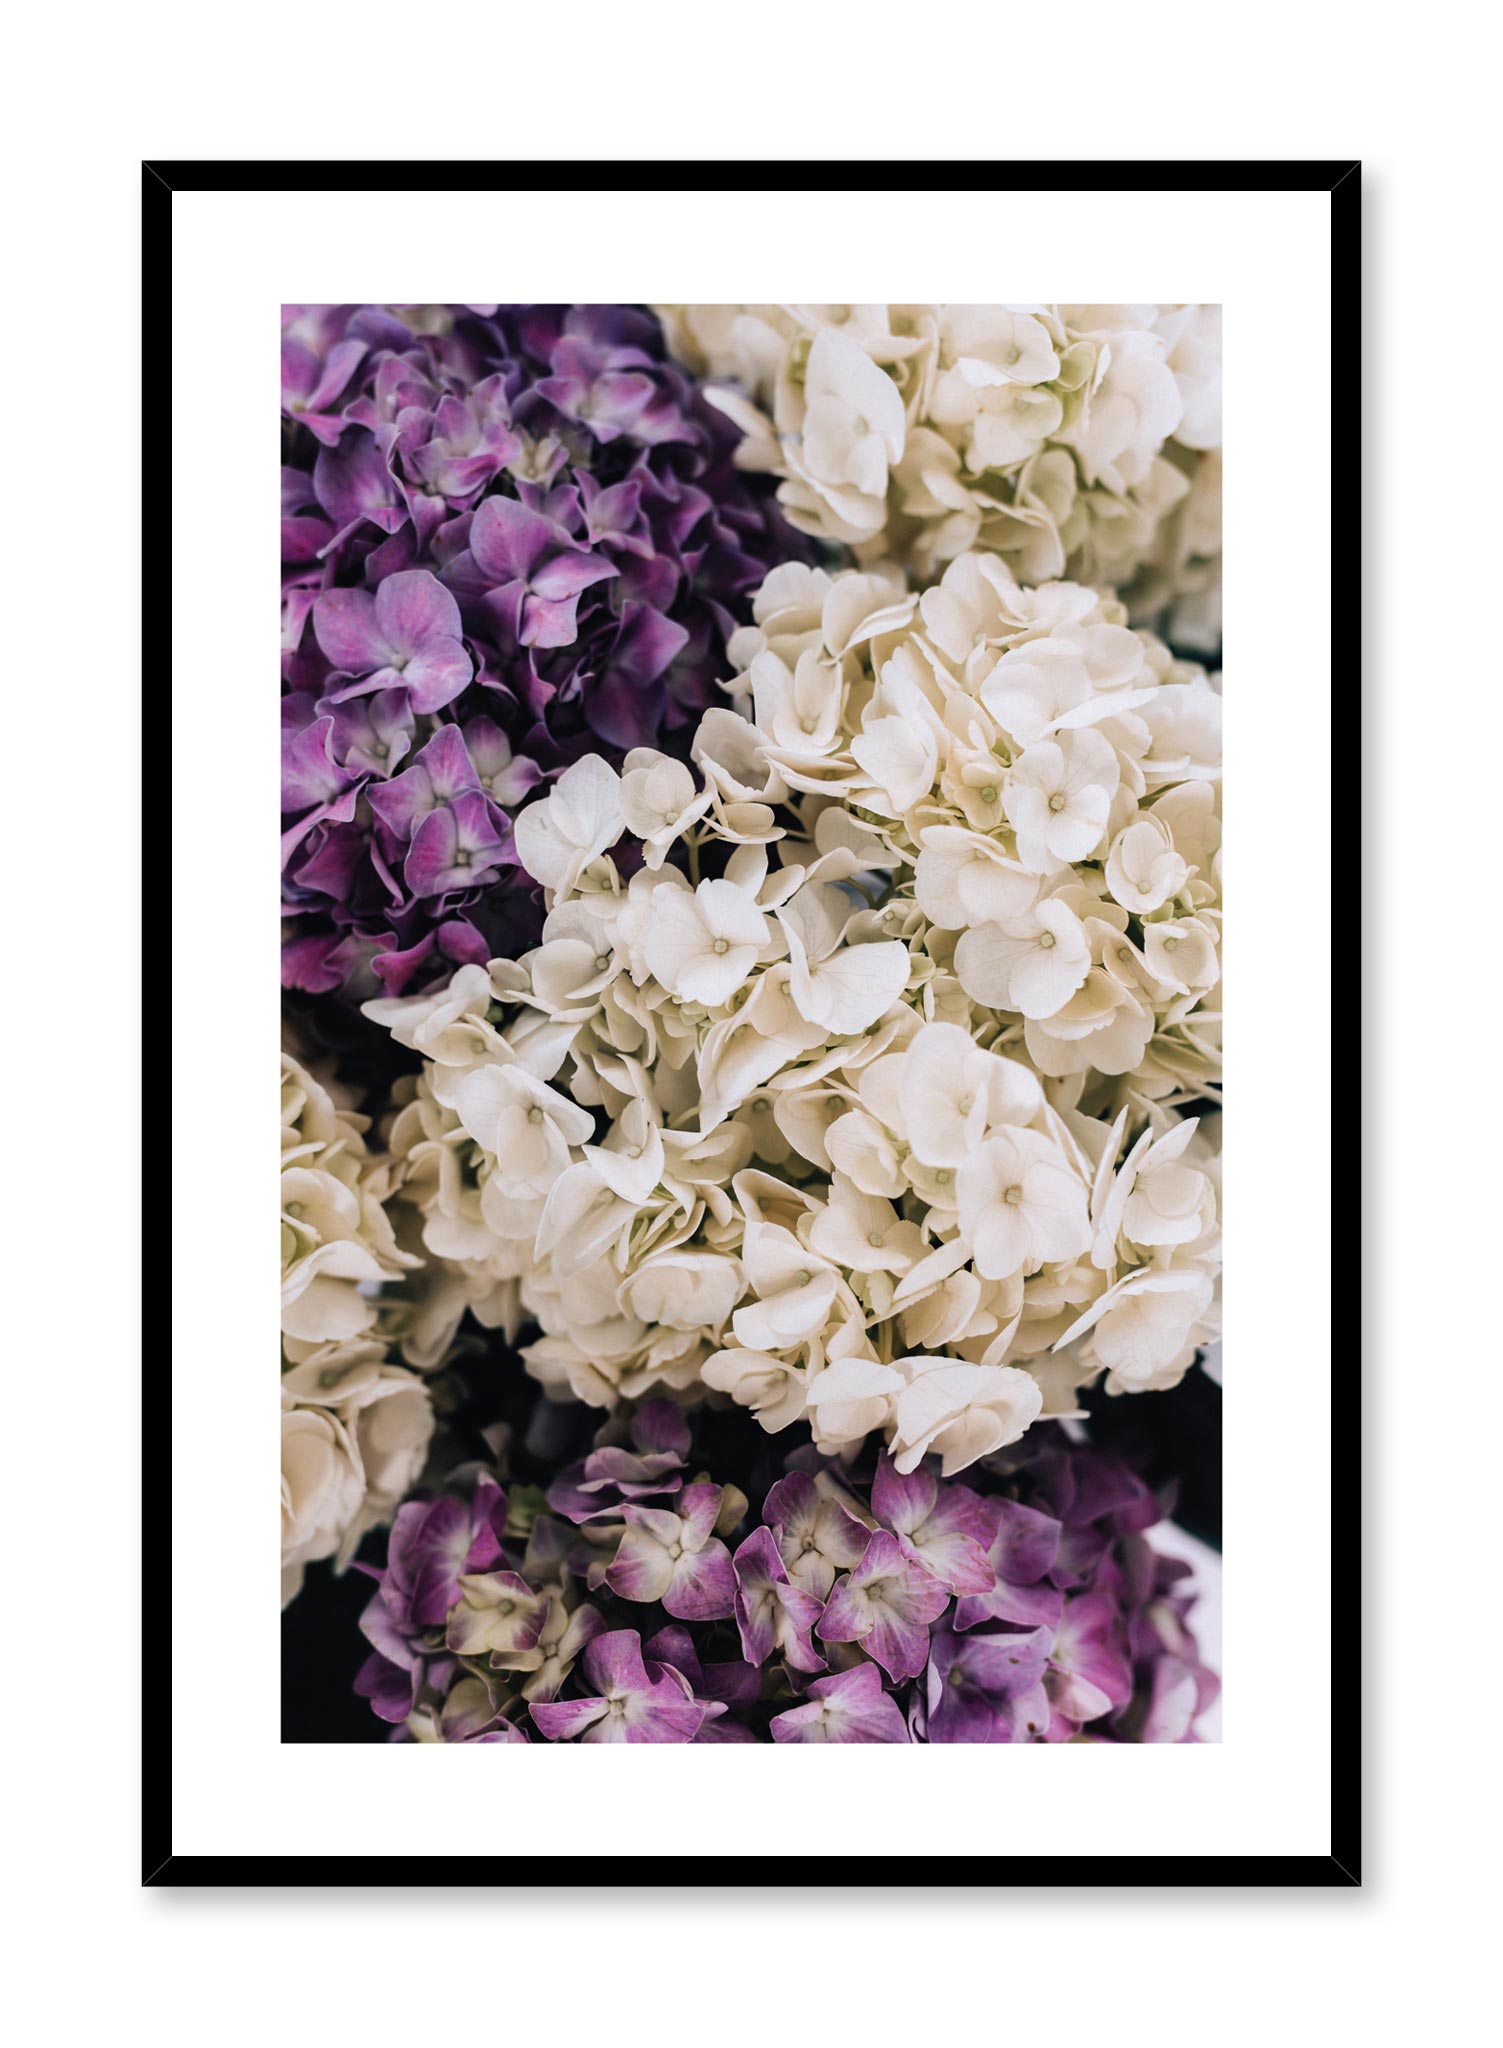 Minimalistic wall poster by Opposite Wall with Purple Hydrangeas floral photography